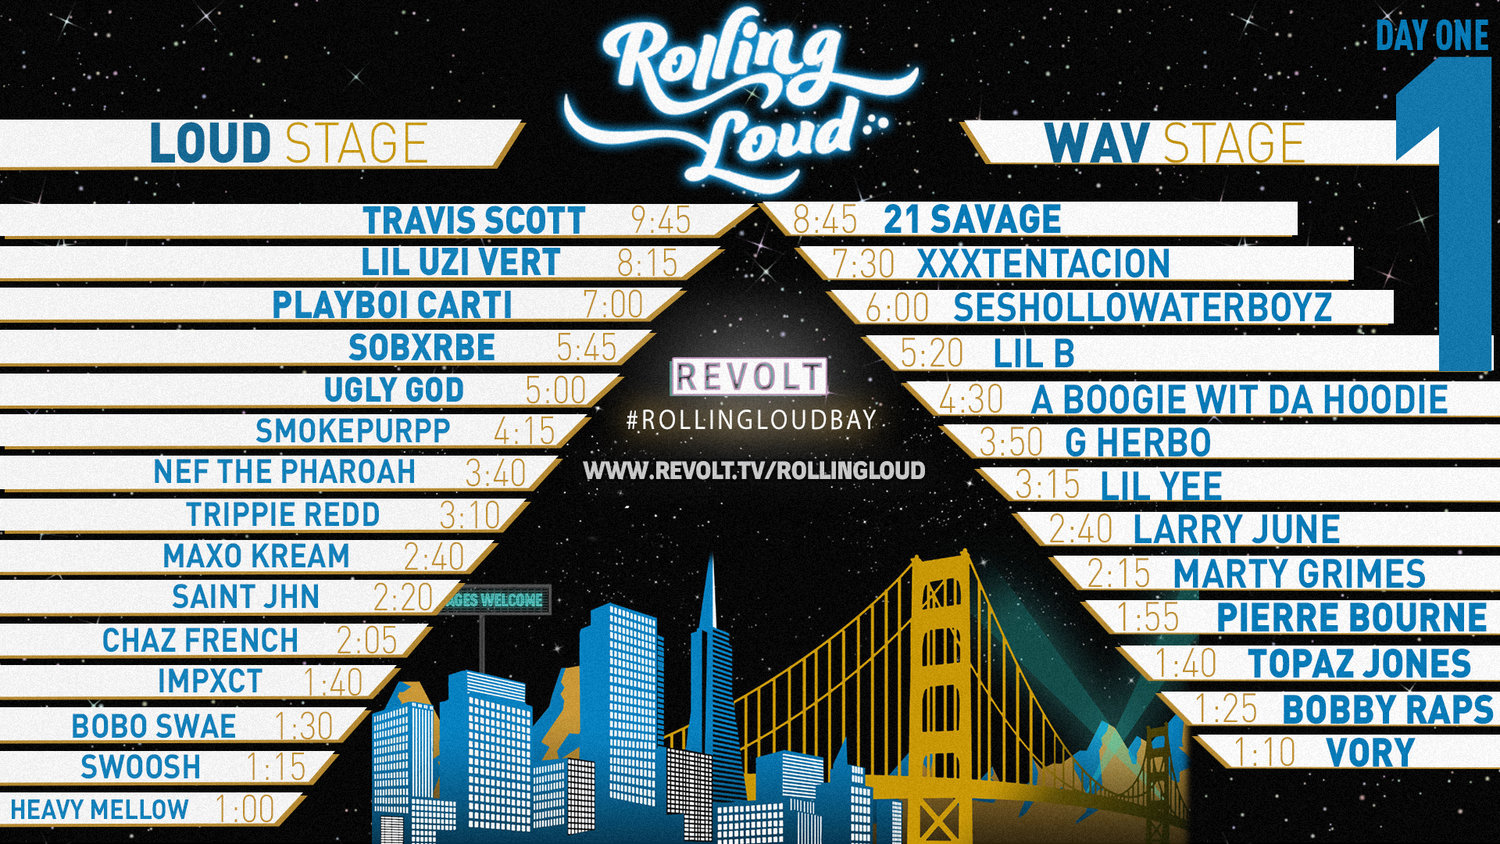 Watch Day 1 Live Stream of Rolling Loud Bay Area Festival | HipHop-N-More